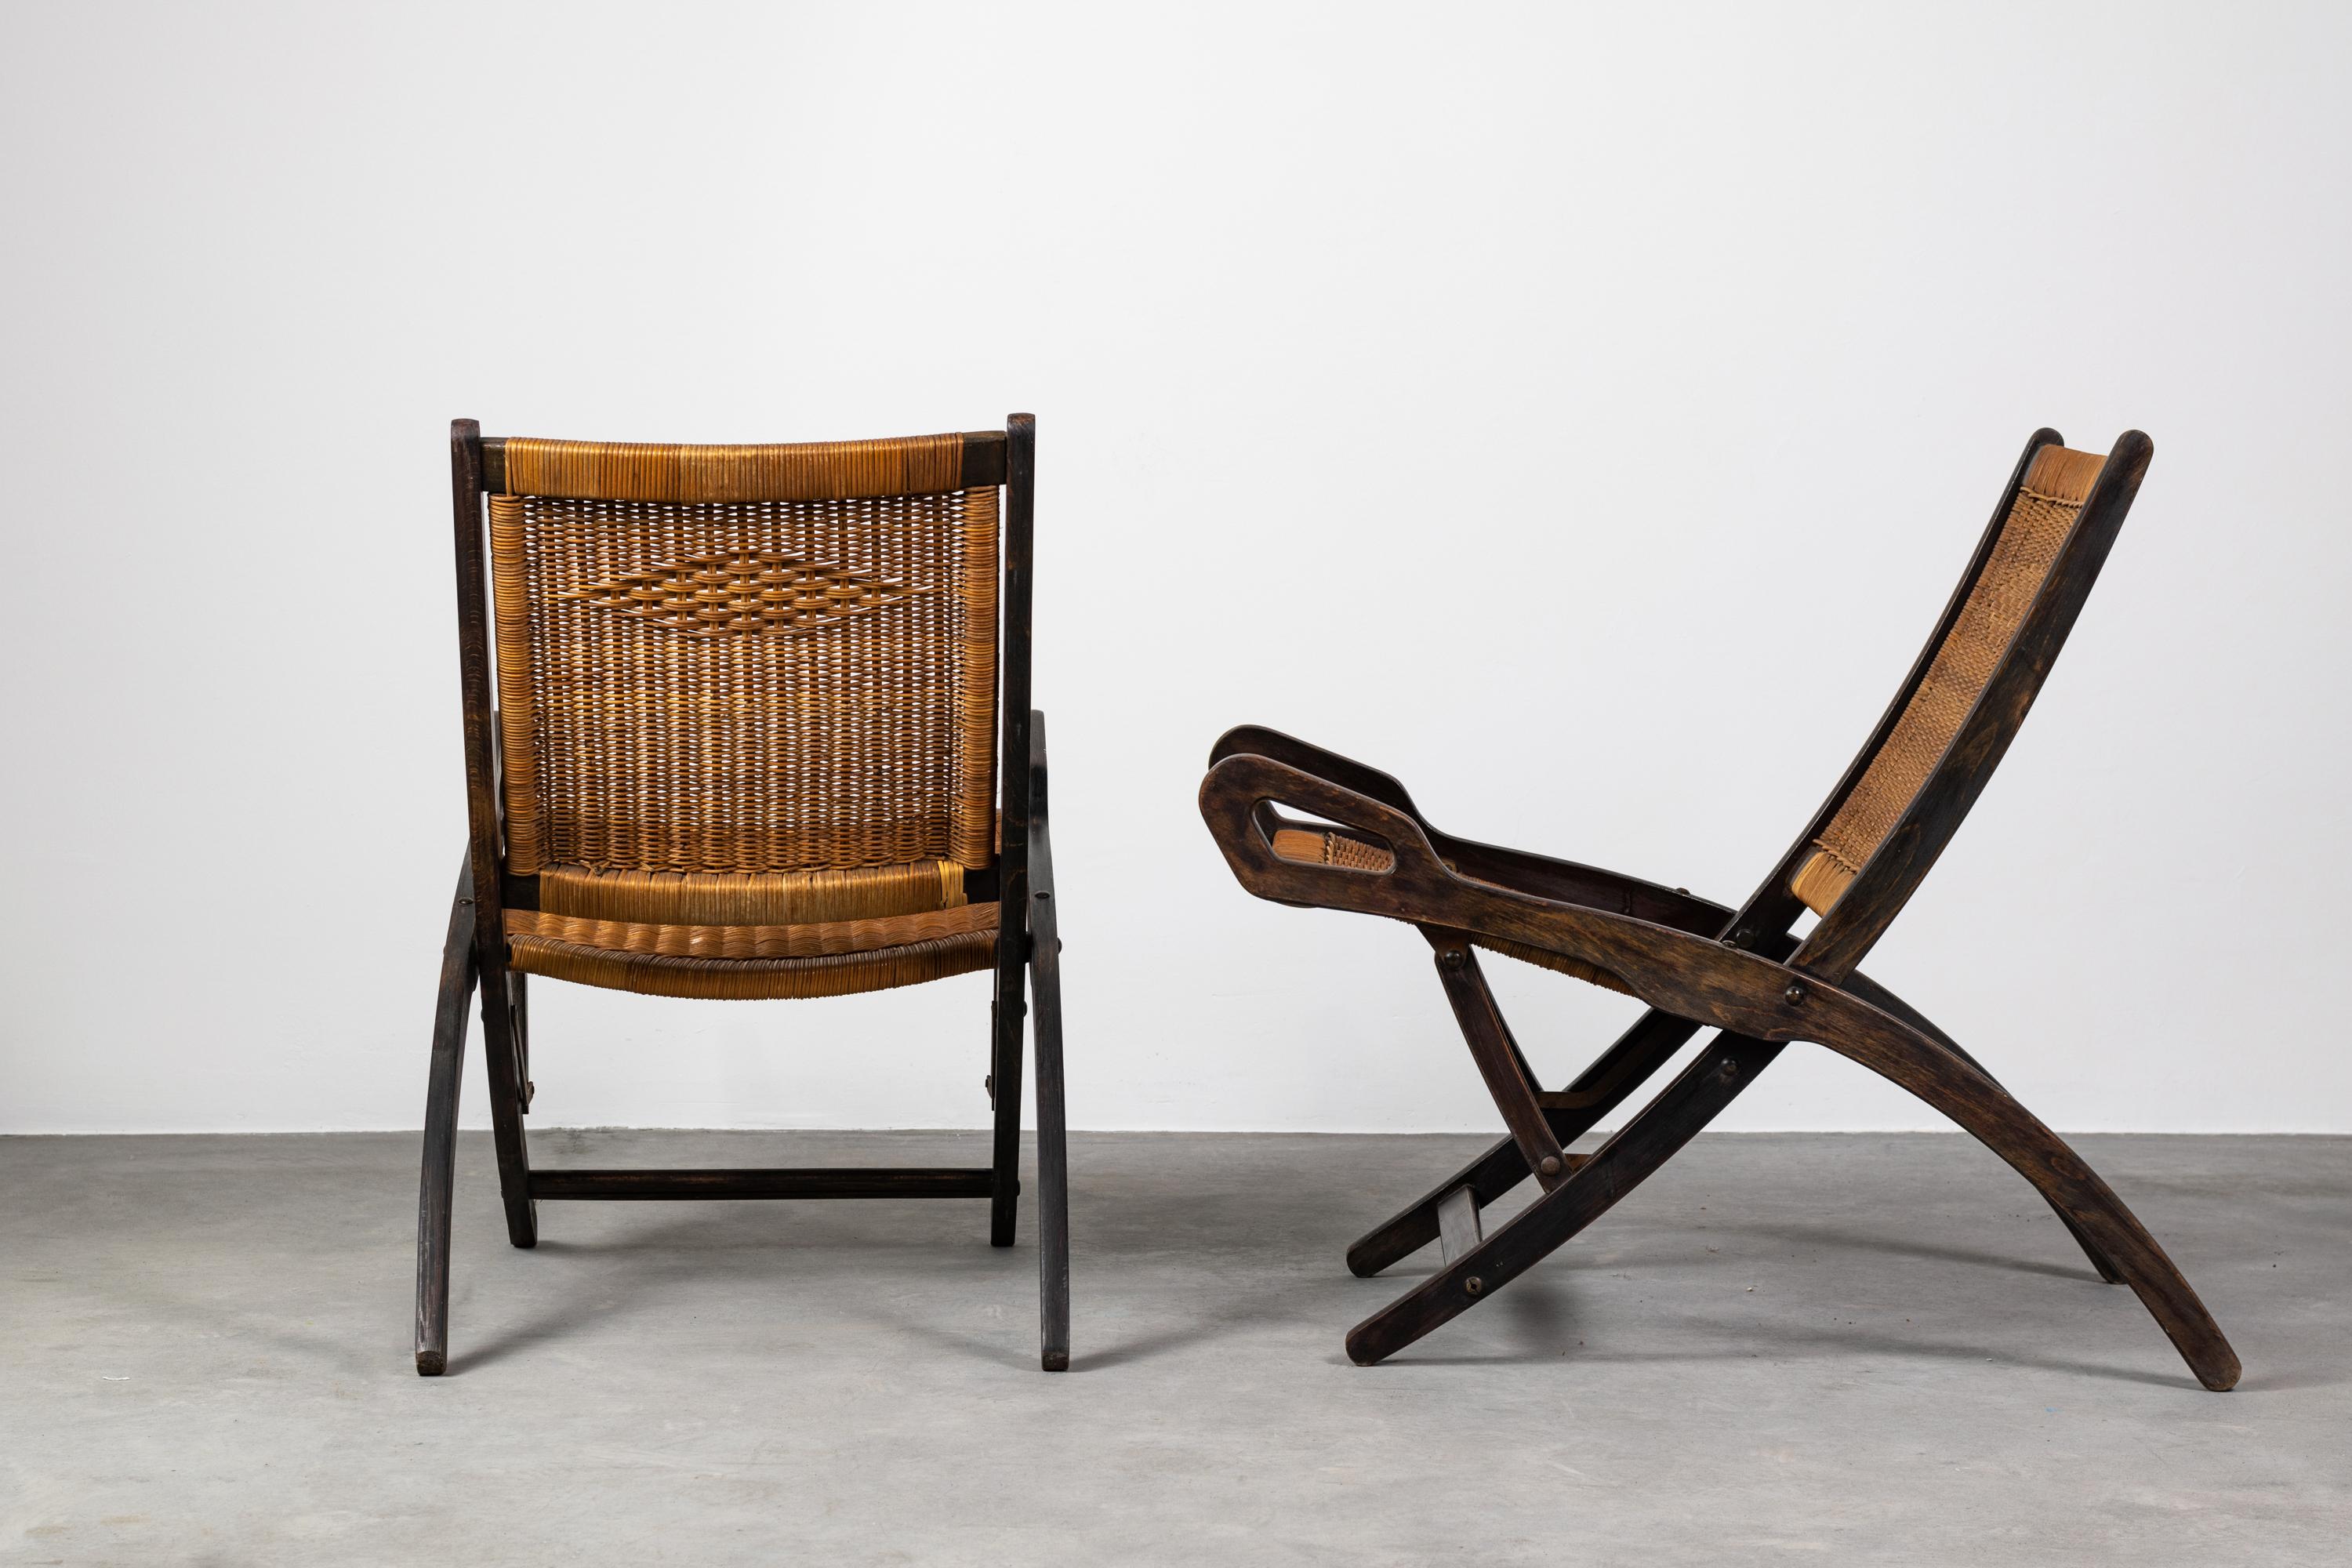 Italian Gio Ponti Set of Two Ninfea Chairs in Wood and Wicker by Reguitti 1960s Italy